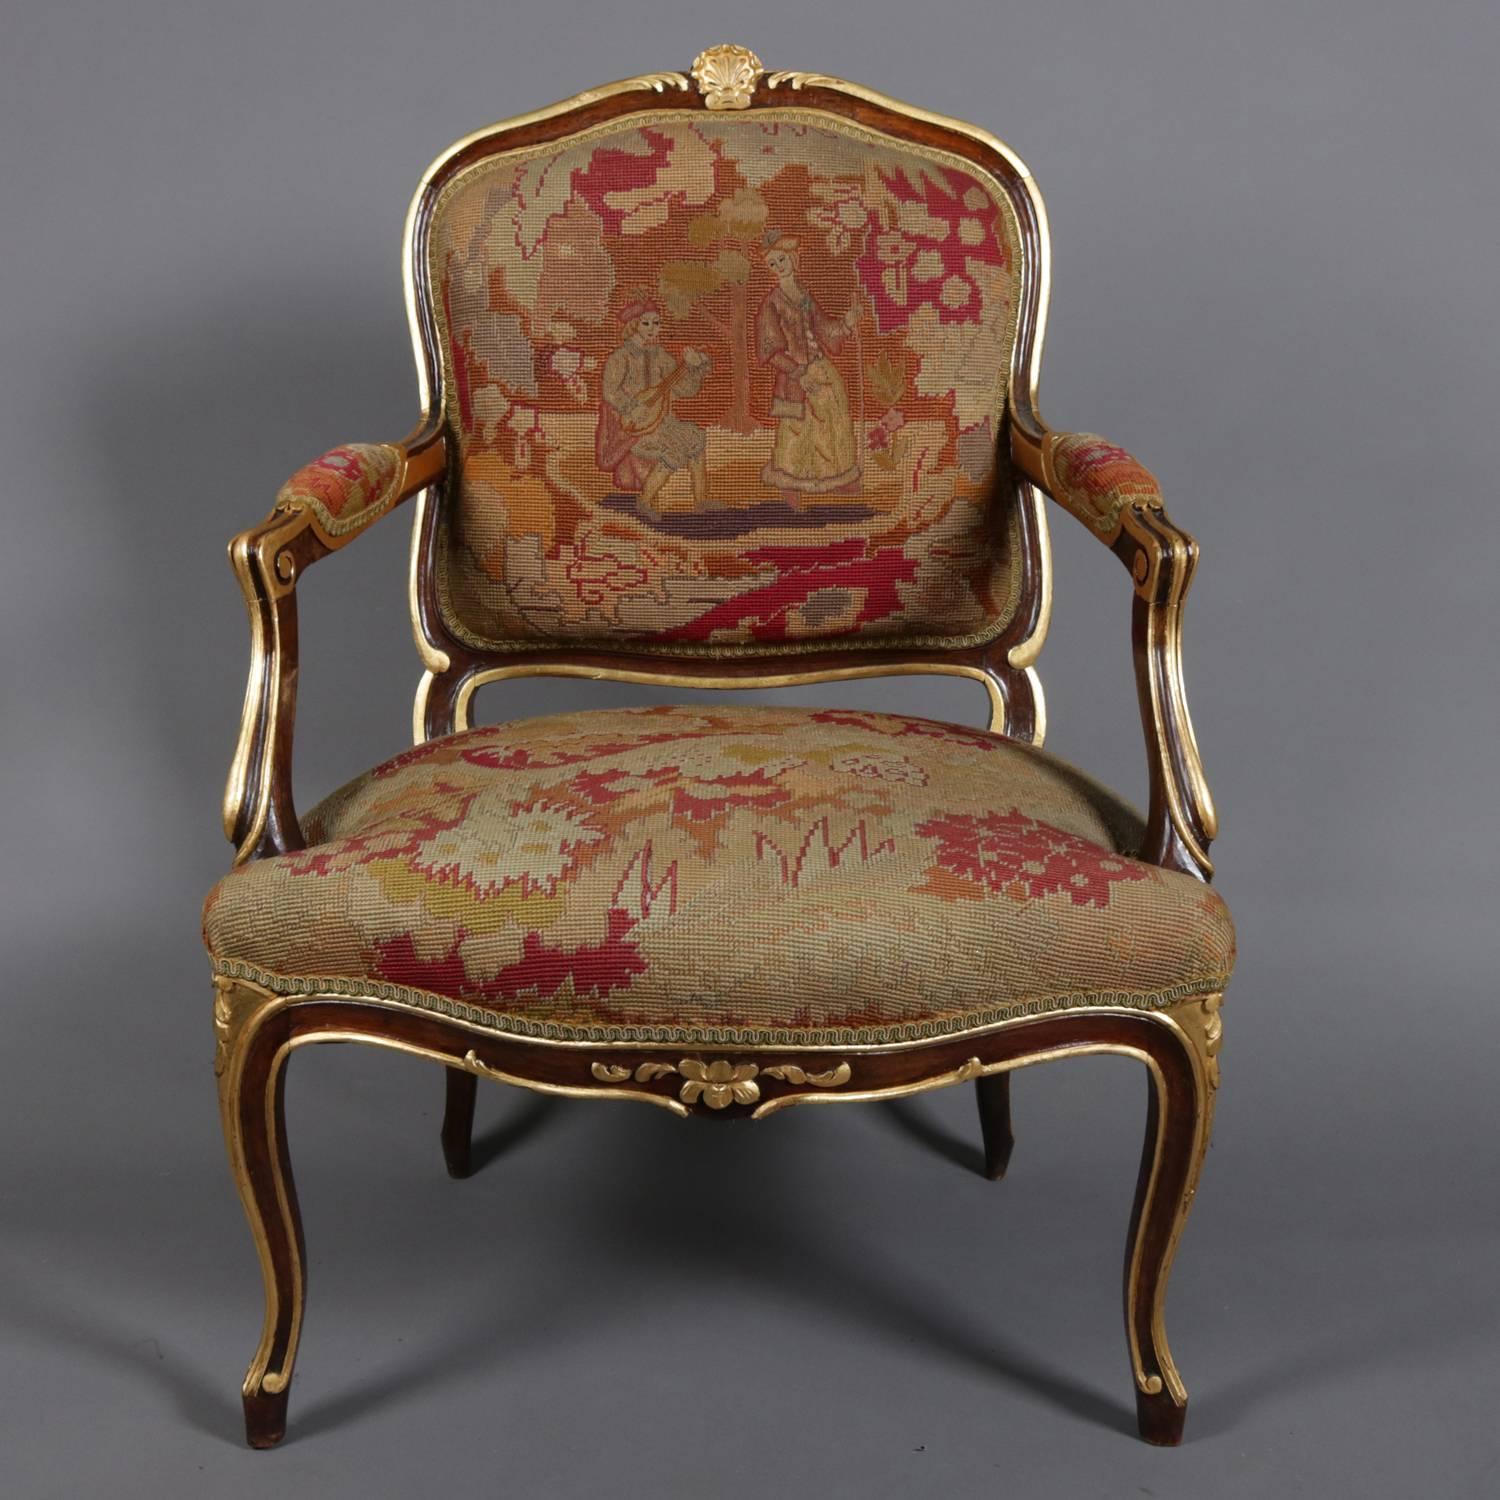 French Louis XVI style fauteuil armchair features fruitwood frame with carved scroll, shell and foliate decoration, highlighted throughout in gilt and seated on cabriole legs; upholstered back, seat and arms are pictorial tapestry with countryside